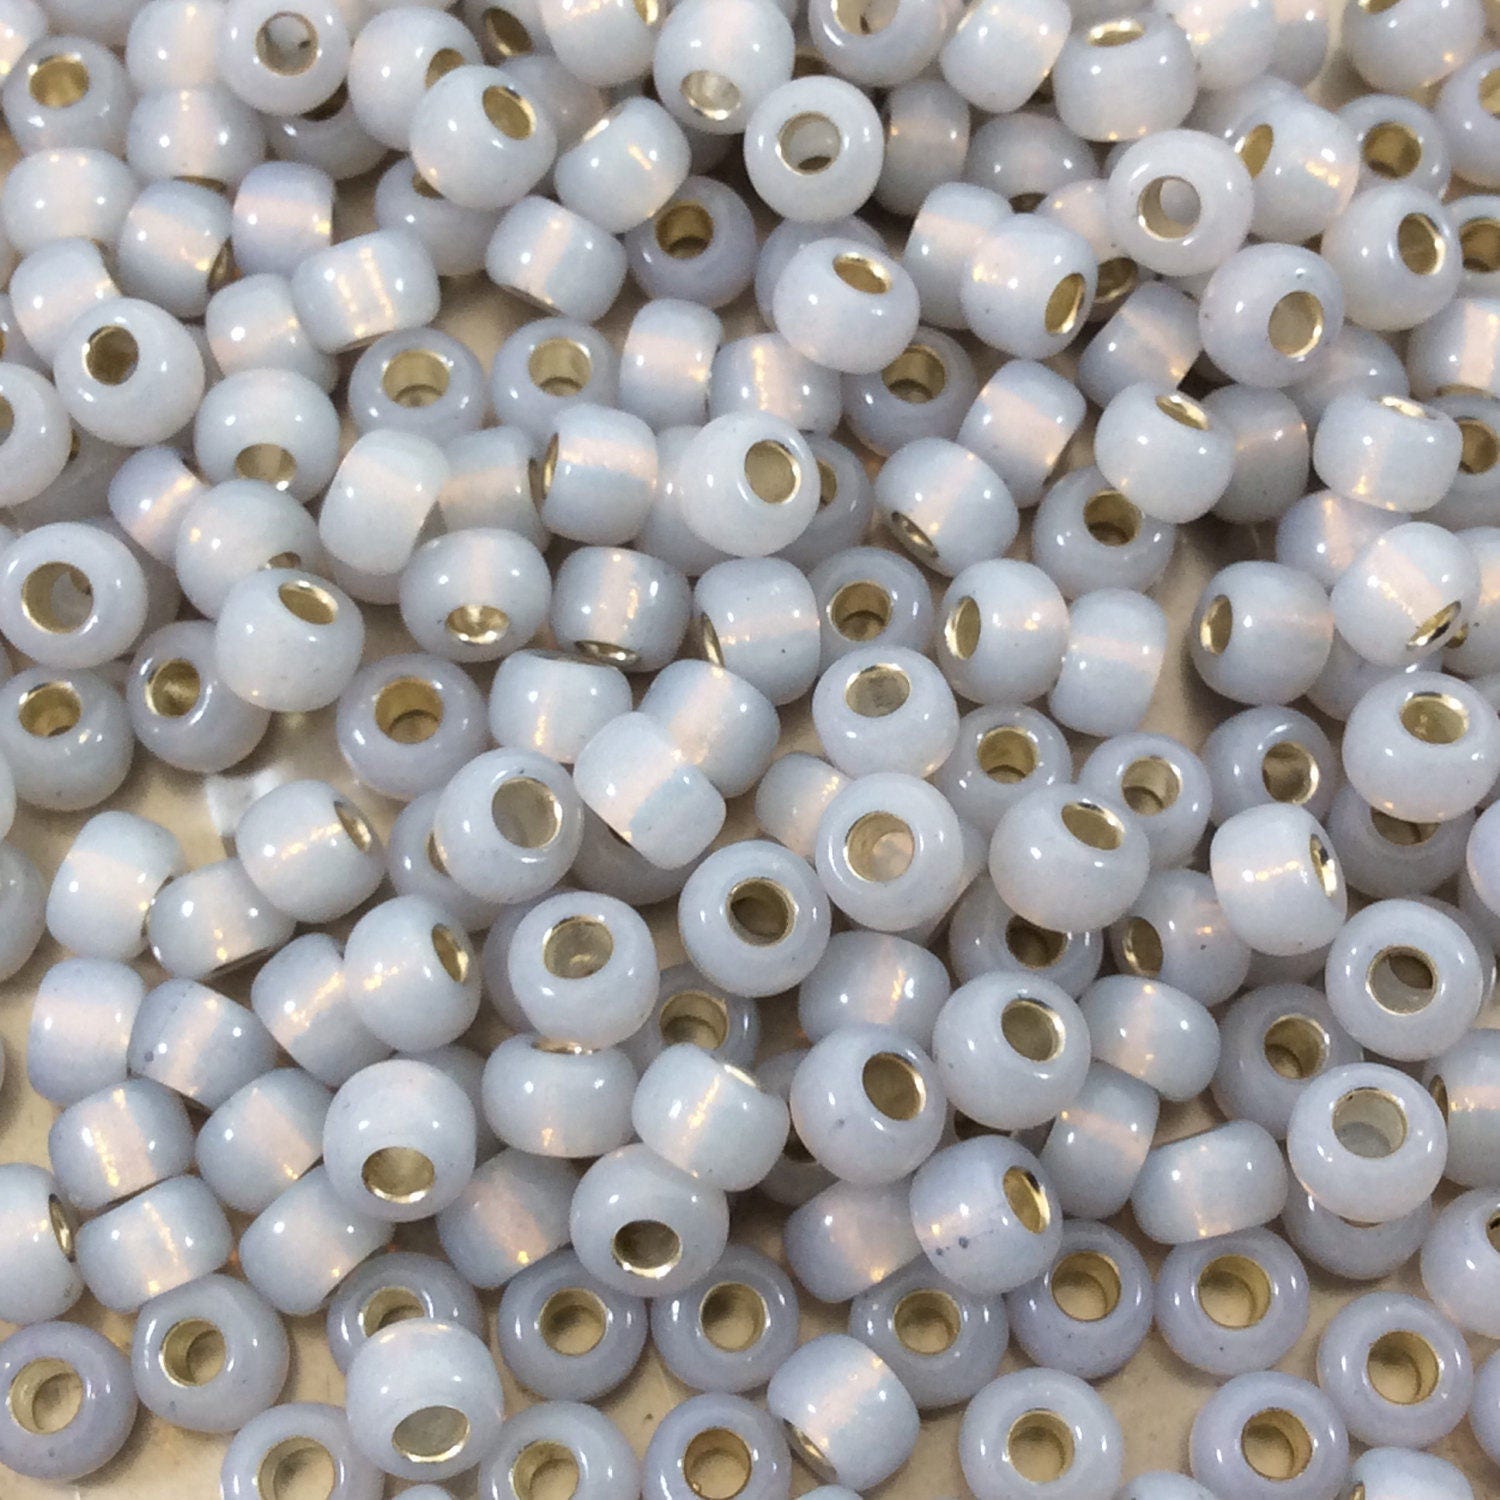 Alabaster Dull White Tile Beads for Jewelry Making Bracelets, Necklaces 250  Czech Glass for Craft Native Jewelry Beading Supplies for DIY Crafts